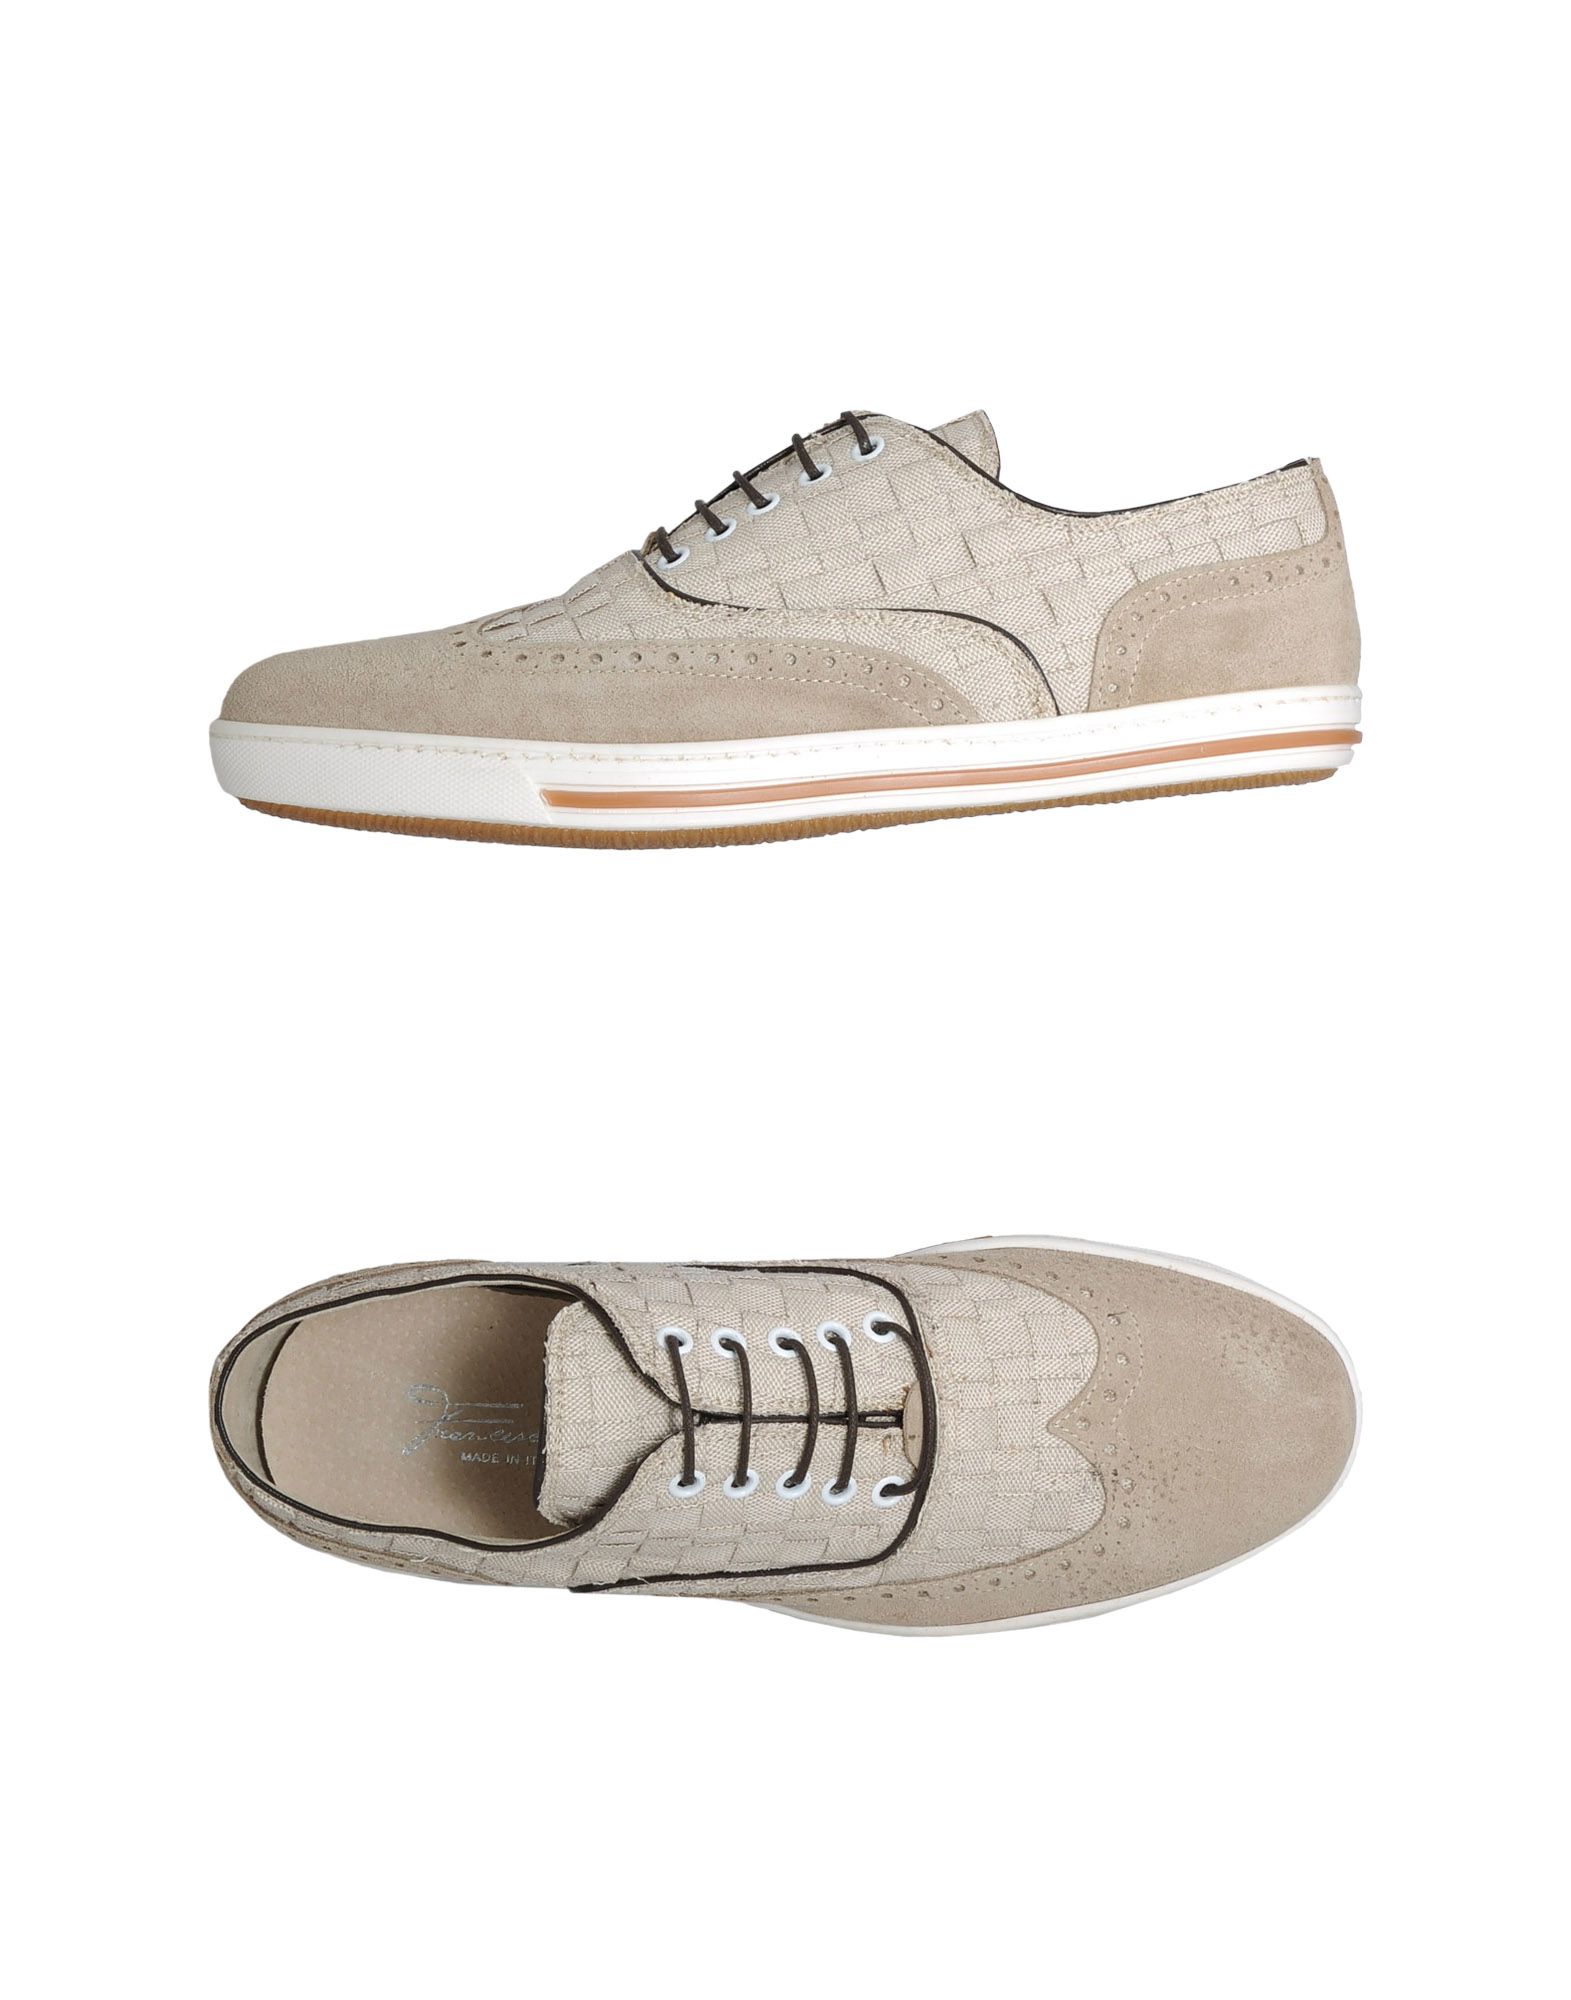 Francesconi Trainers in Beige for Men - Save 72% | Lyst